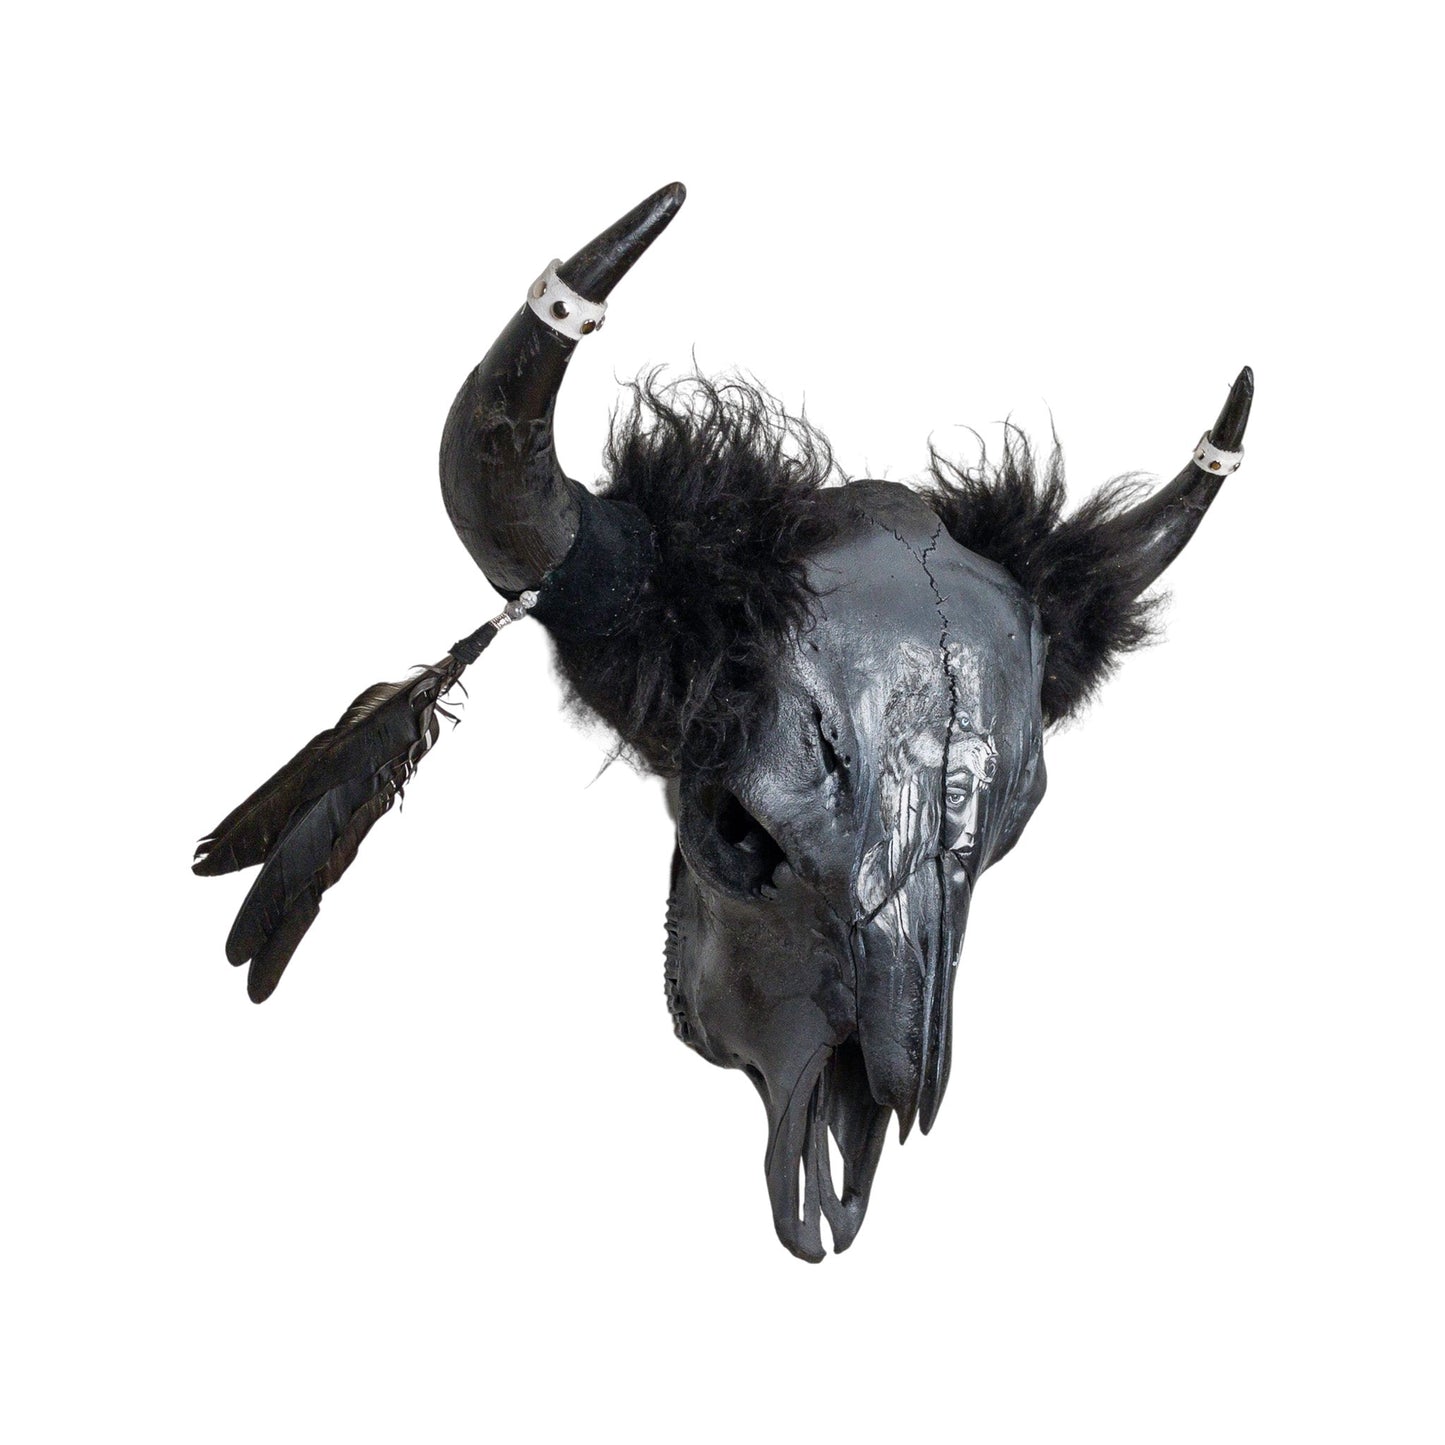 A Longhorn Engraved Skull Taxidermy Wall Decor featuring a wolf and a woman's face